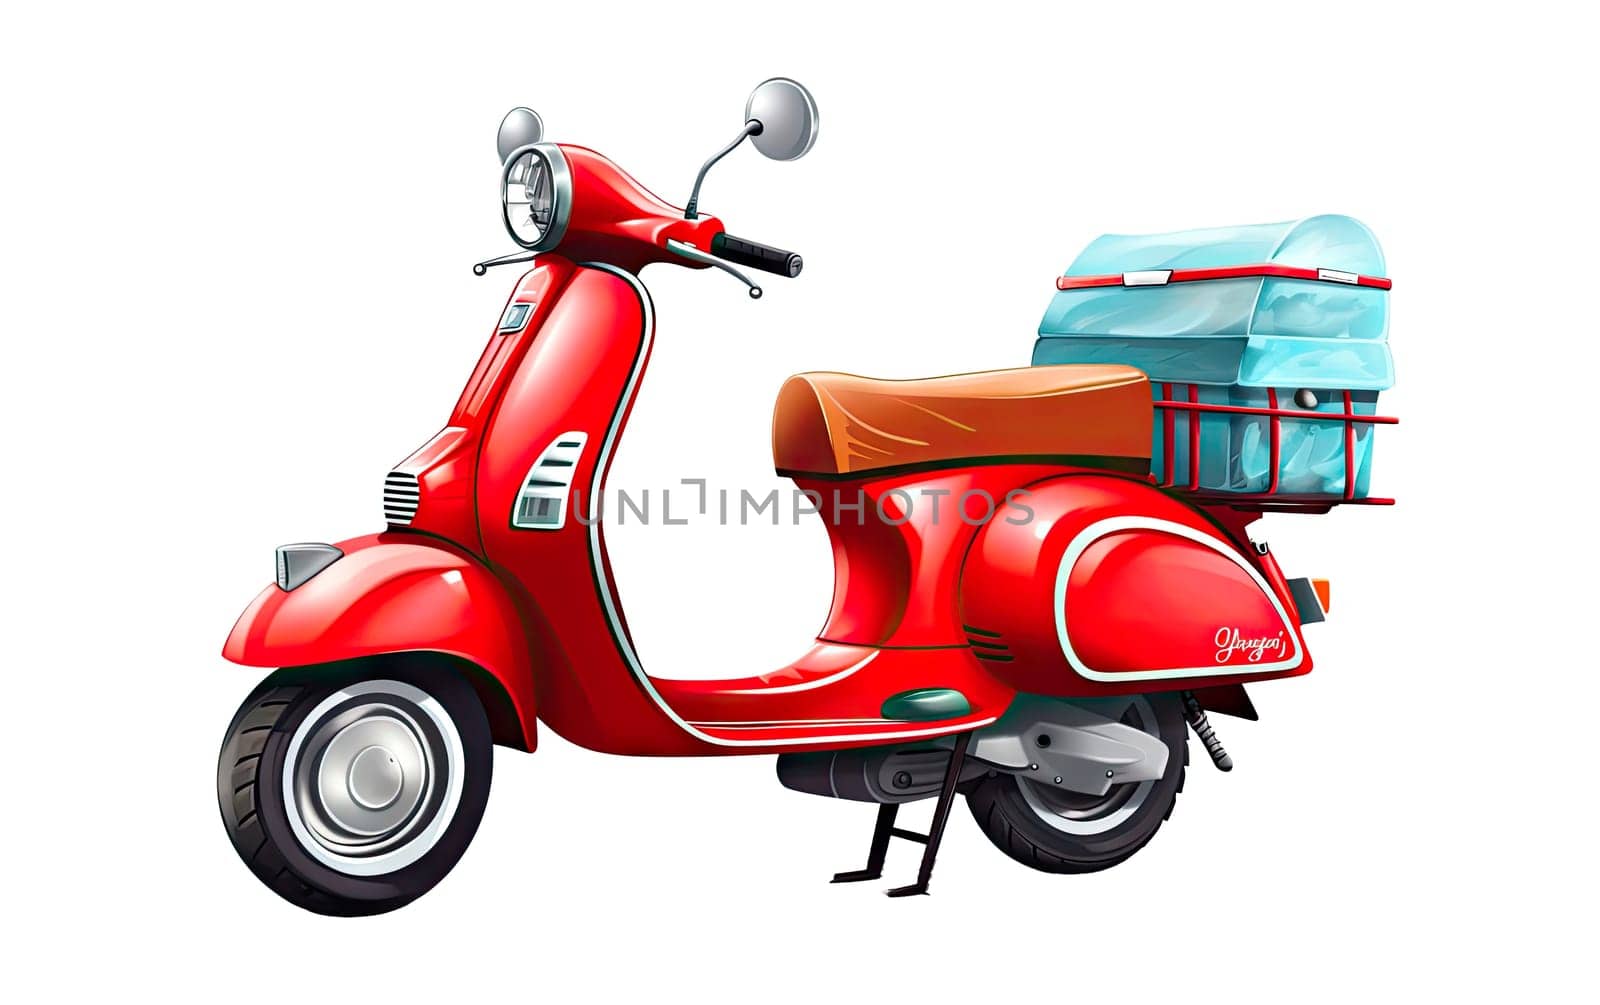 Courier service Delivery. Creative concept design scooter red color, cardboard boxes. Time to Shopping